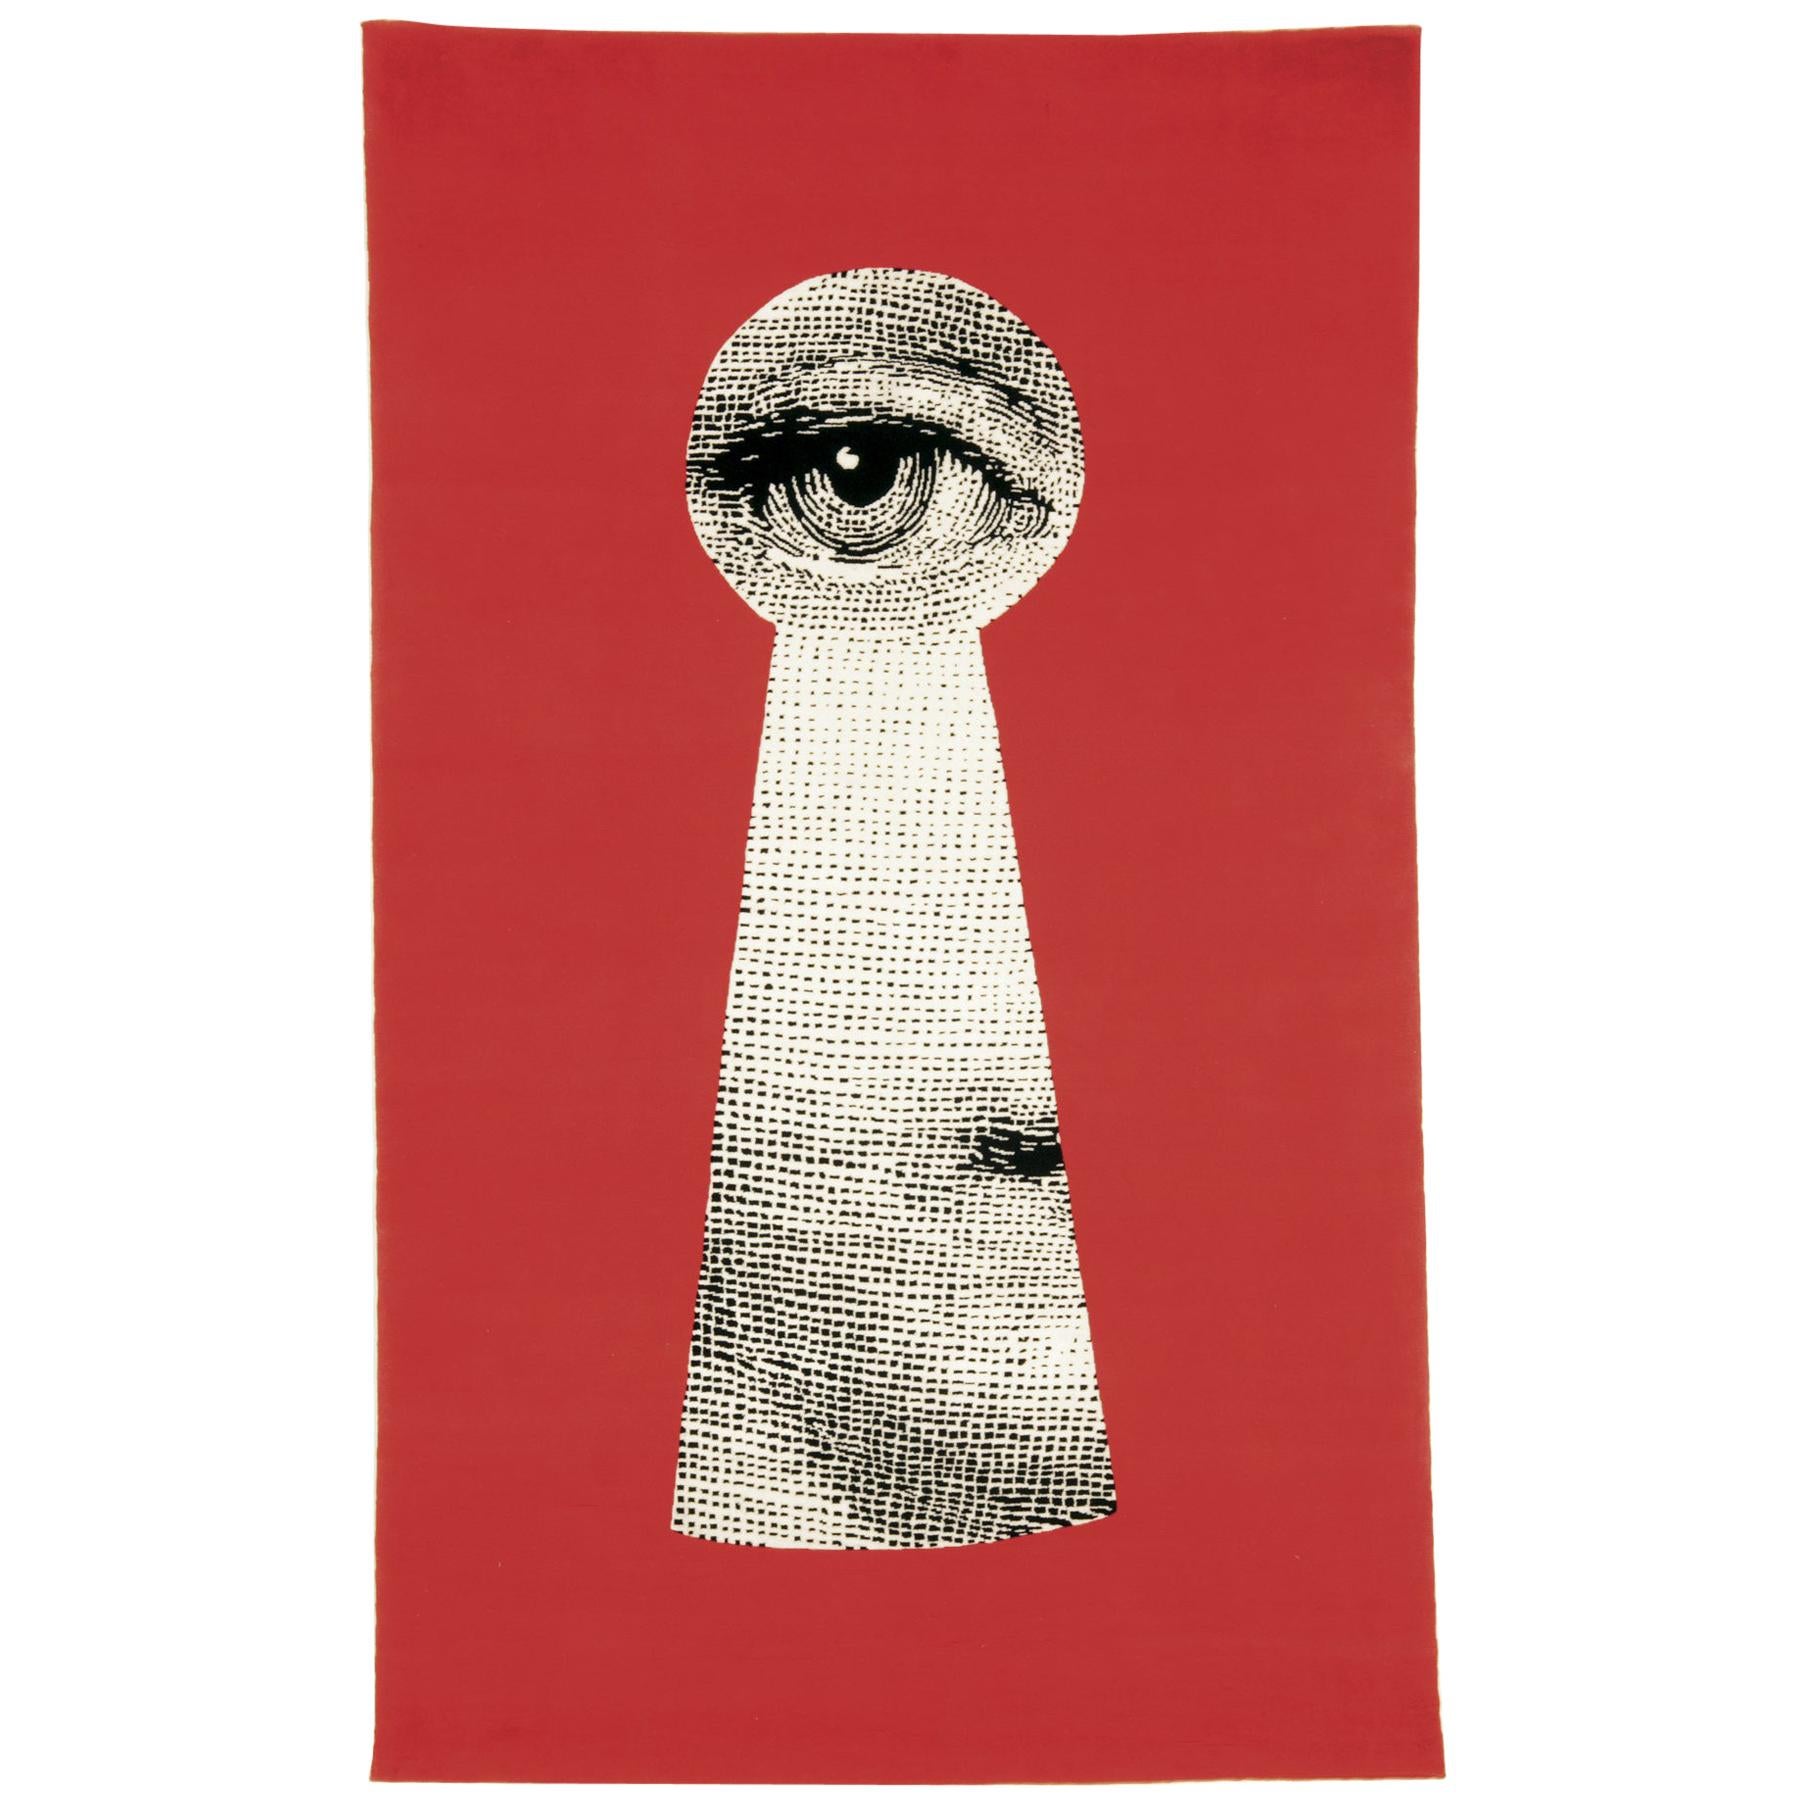 Contemporary Fornasetti Carpet Rug Lock Keyhole Silk Wool Red Black White Lady